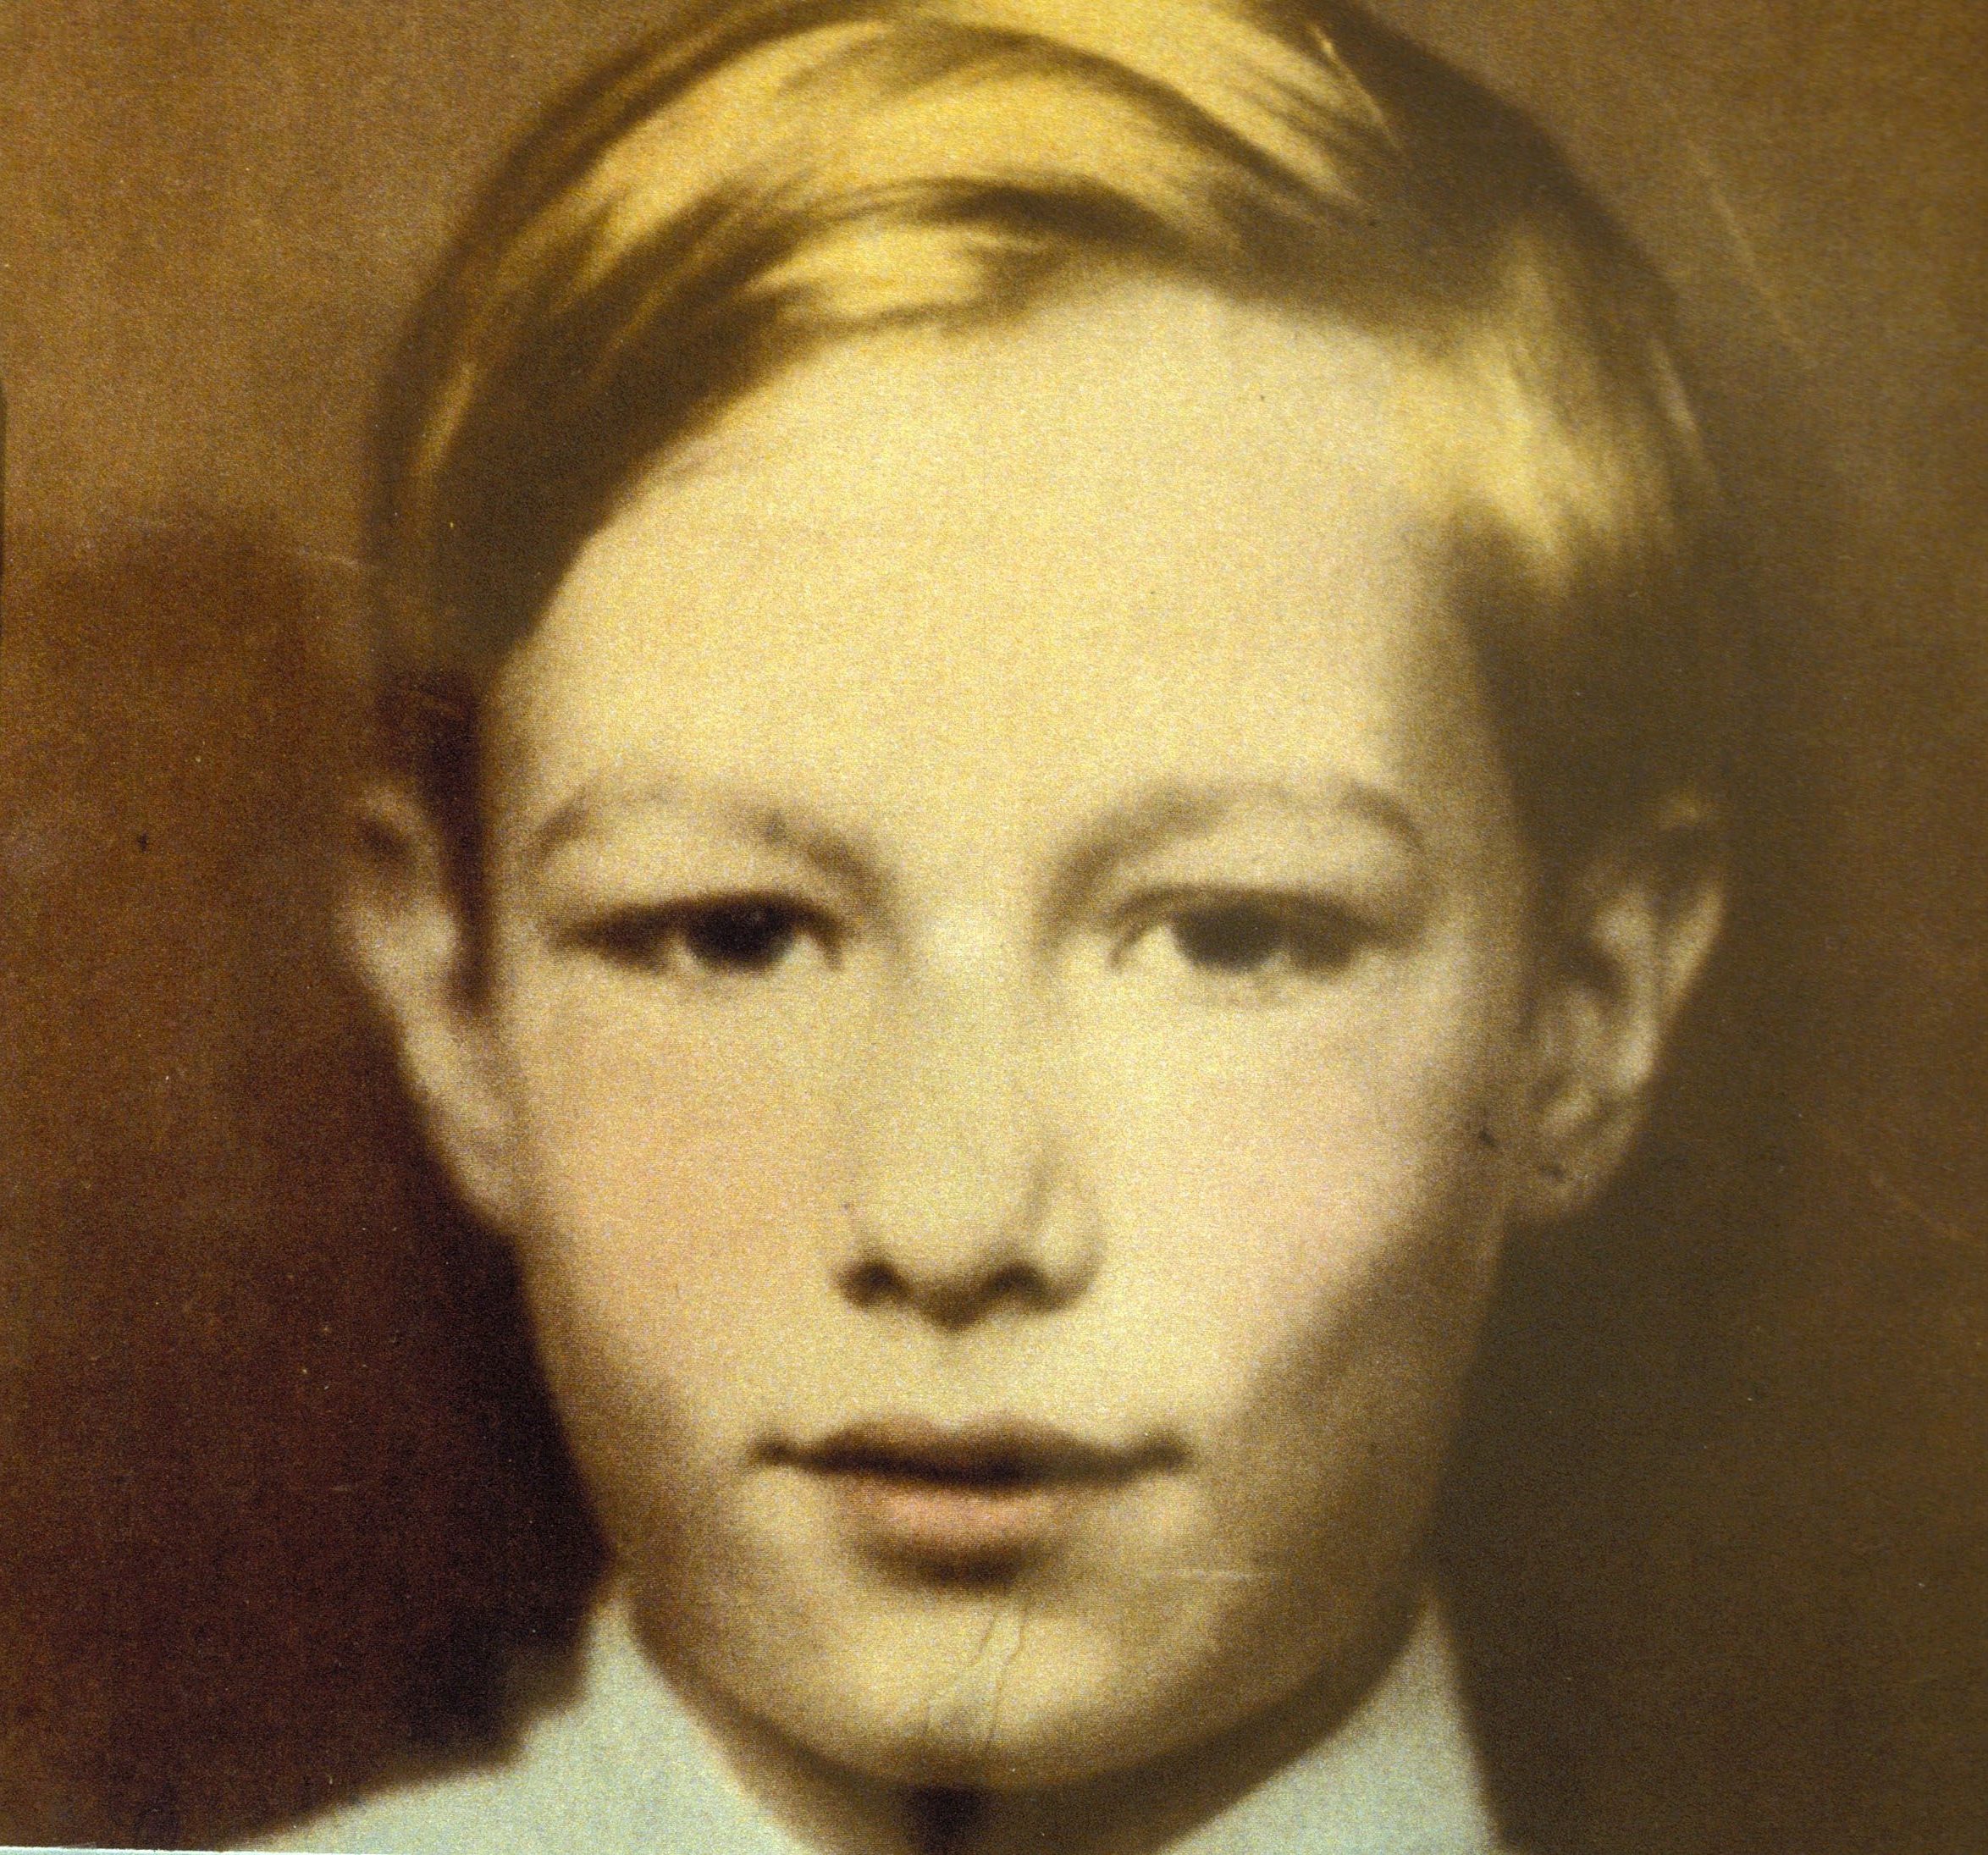 Andy Warhol's first painting, 1937. Photo by Remi BENALI/Gamma-Rapho via Getty Images